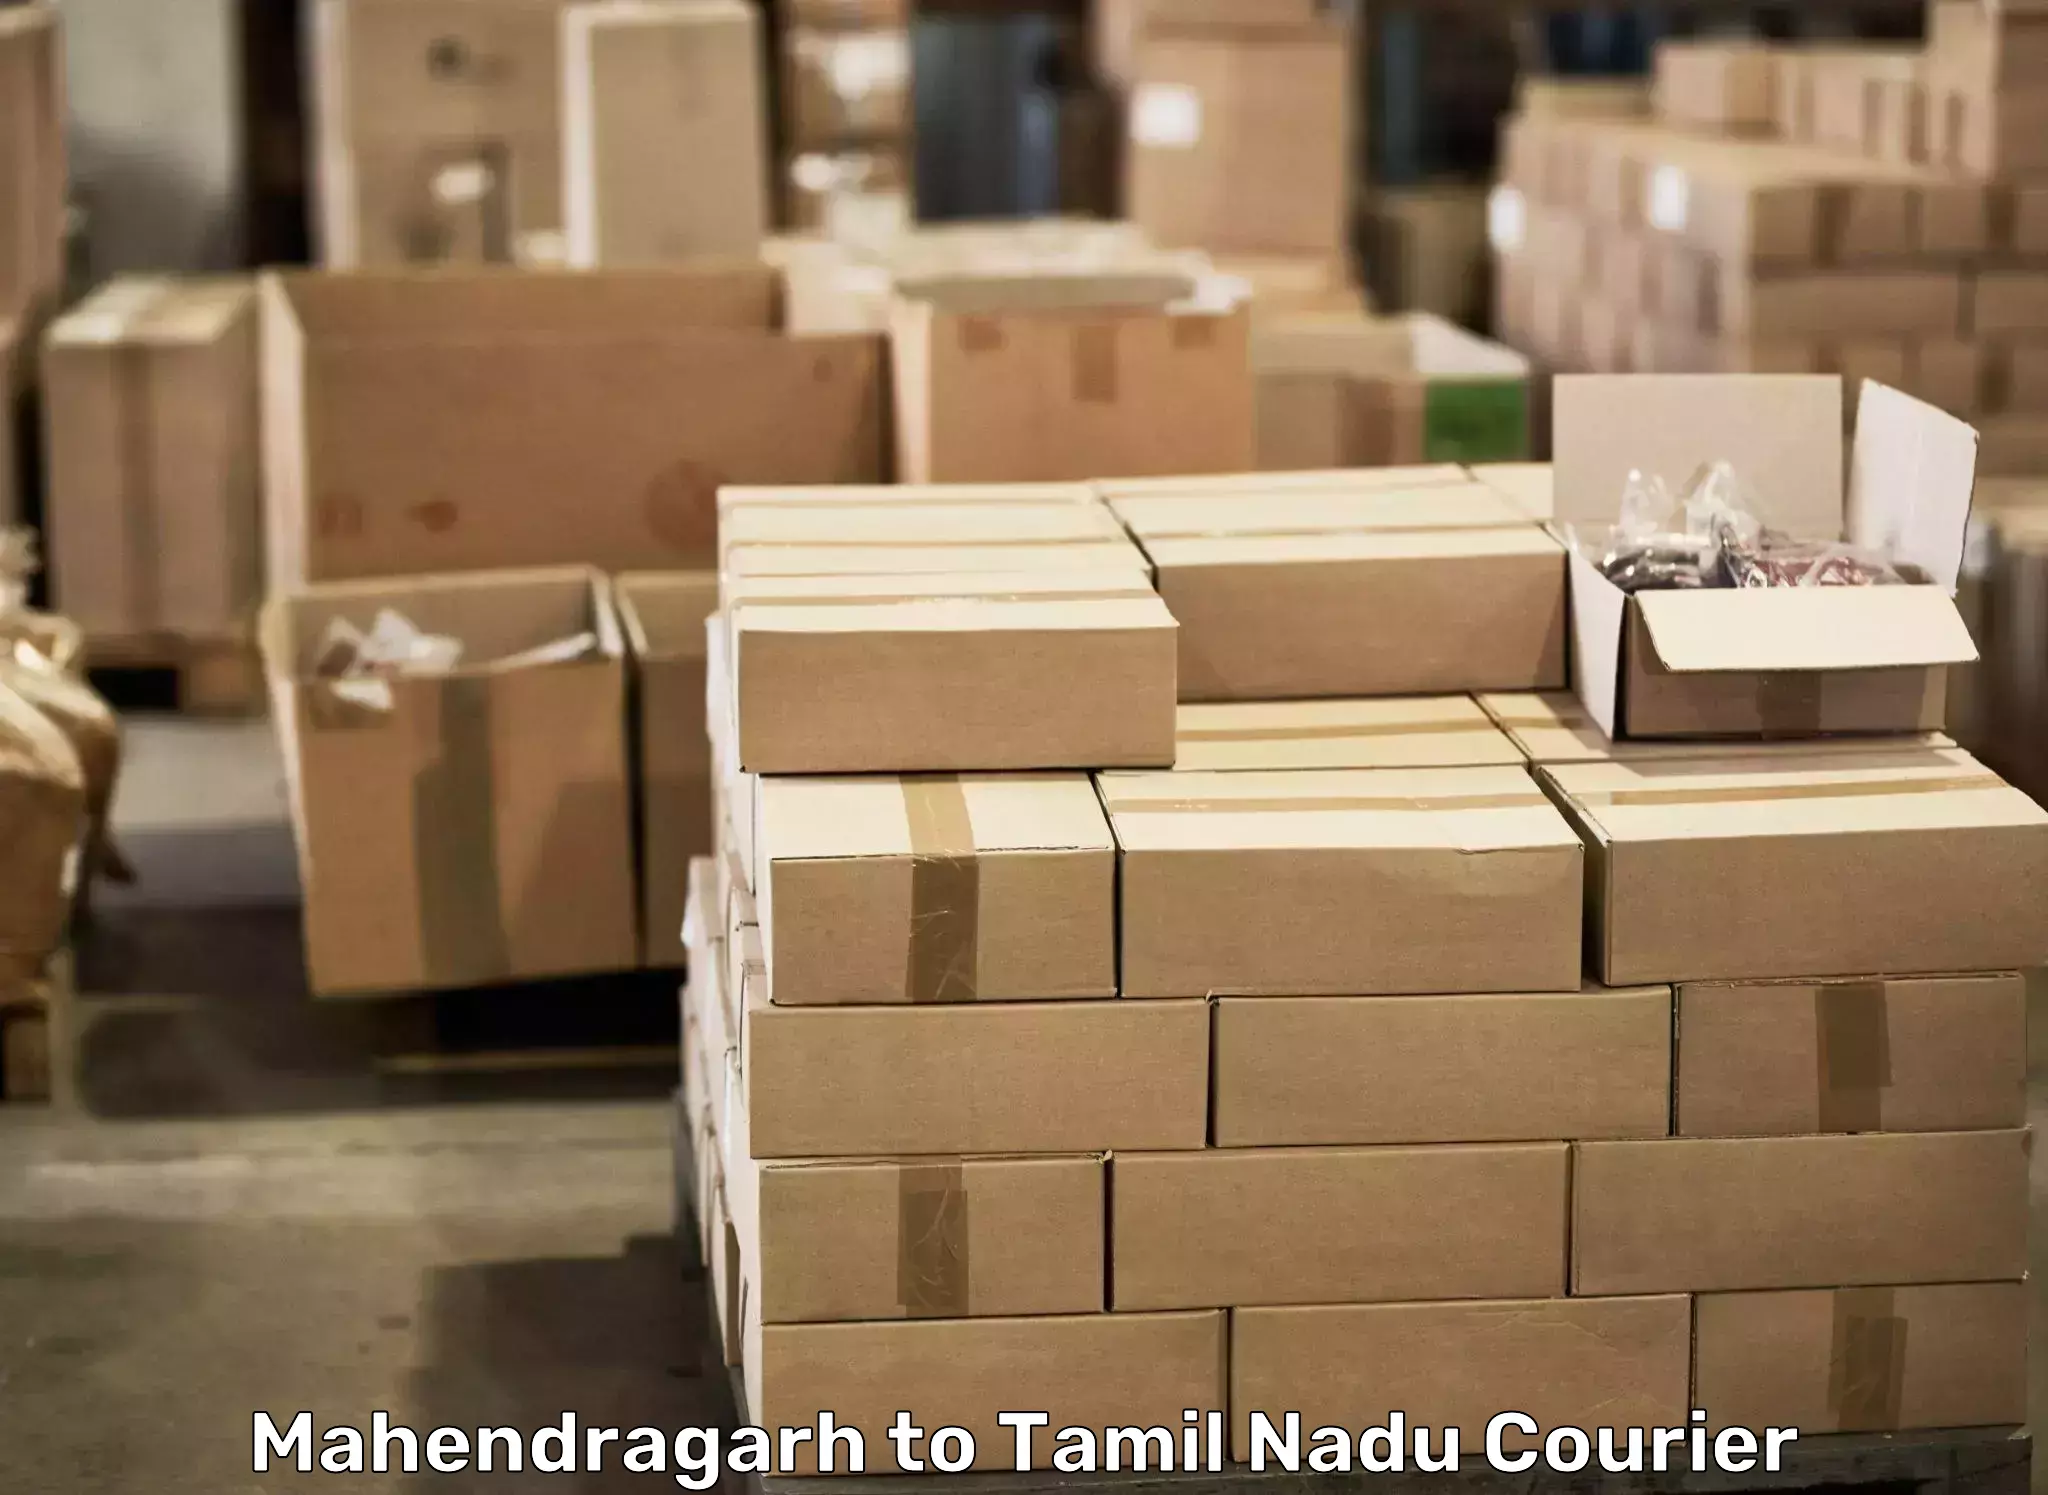 Full-service movers in Mahendragarh to Kuttanur